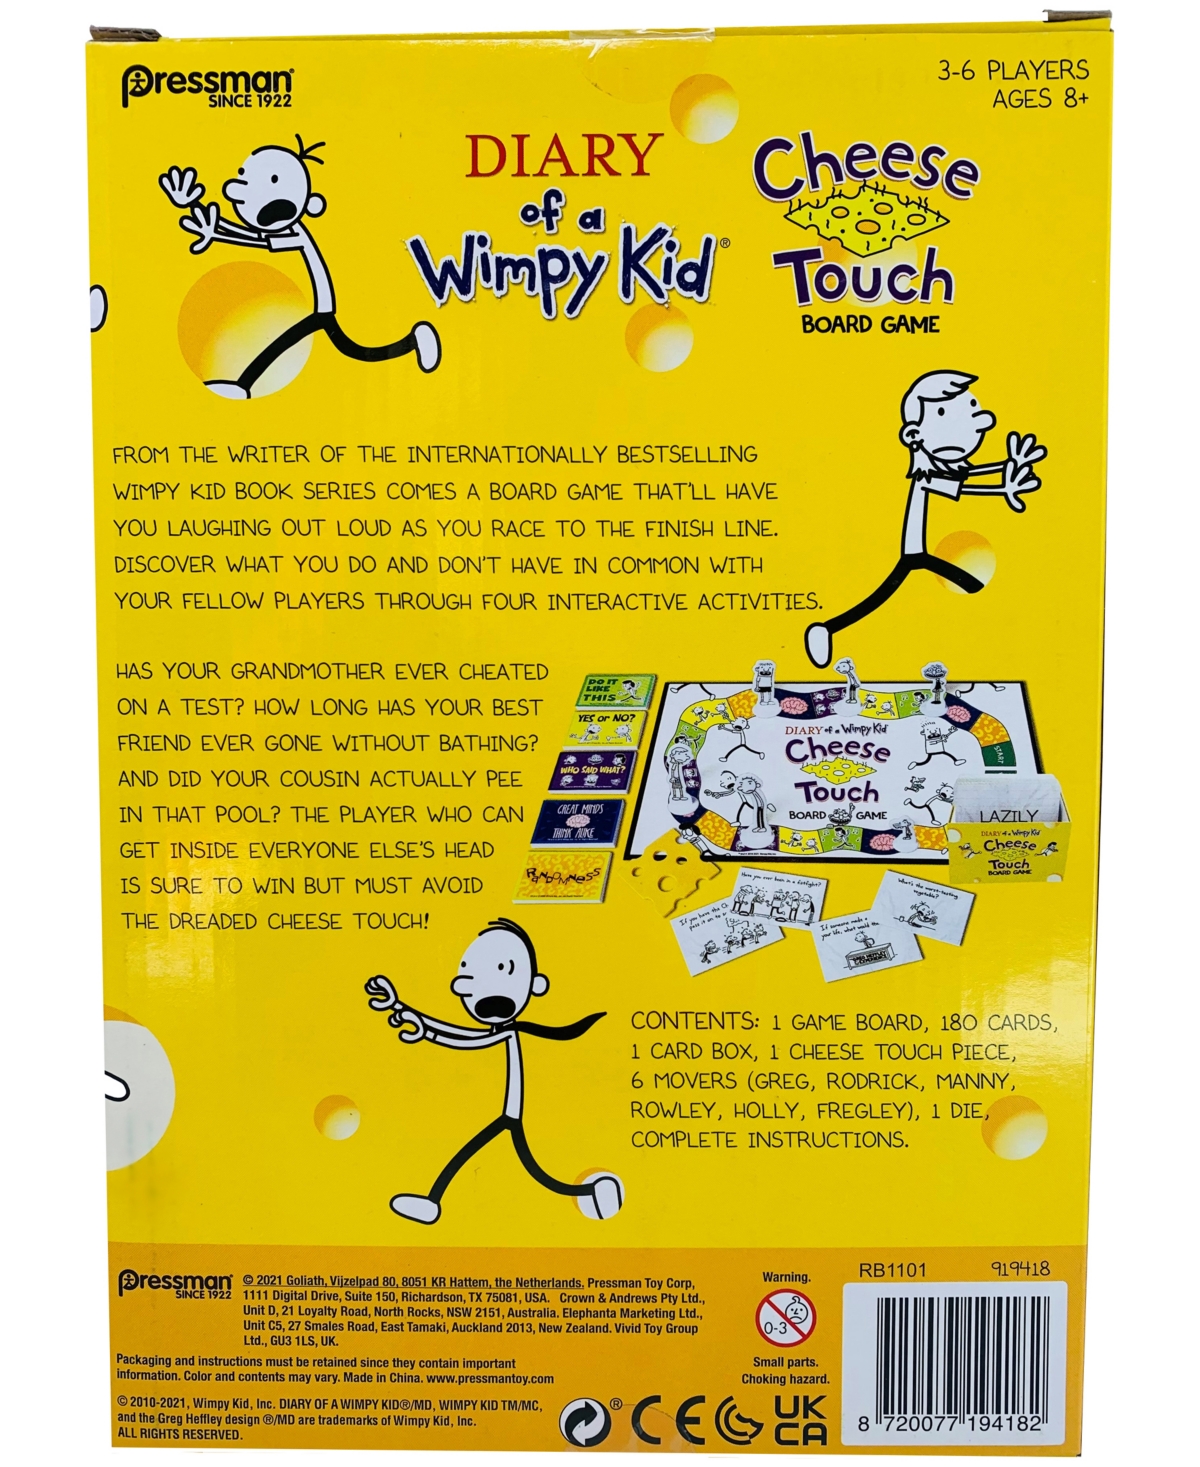 Shop Pressman Toy Diary Of A Wimpy Kid Cheese Touch Board Game Set In Multi